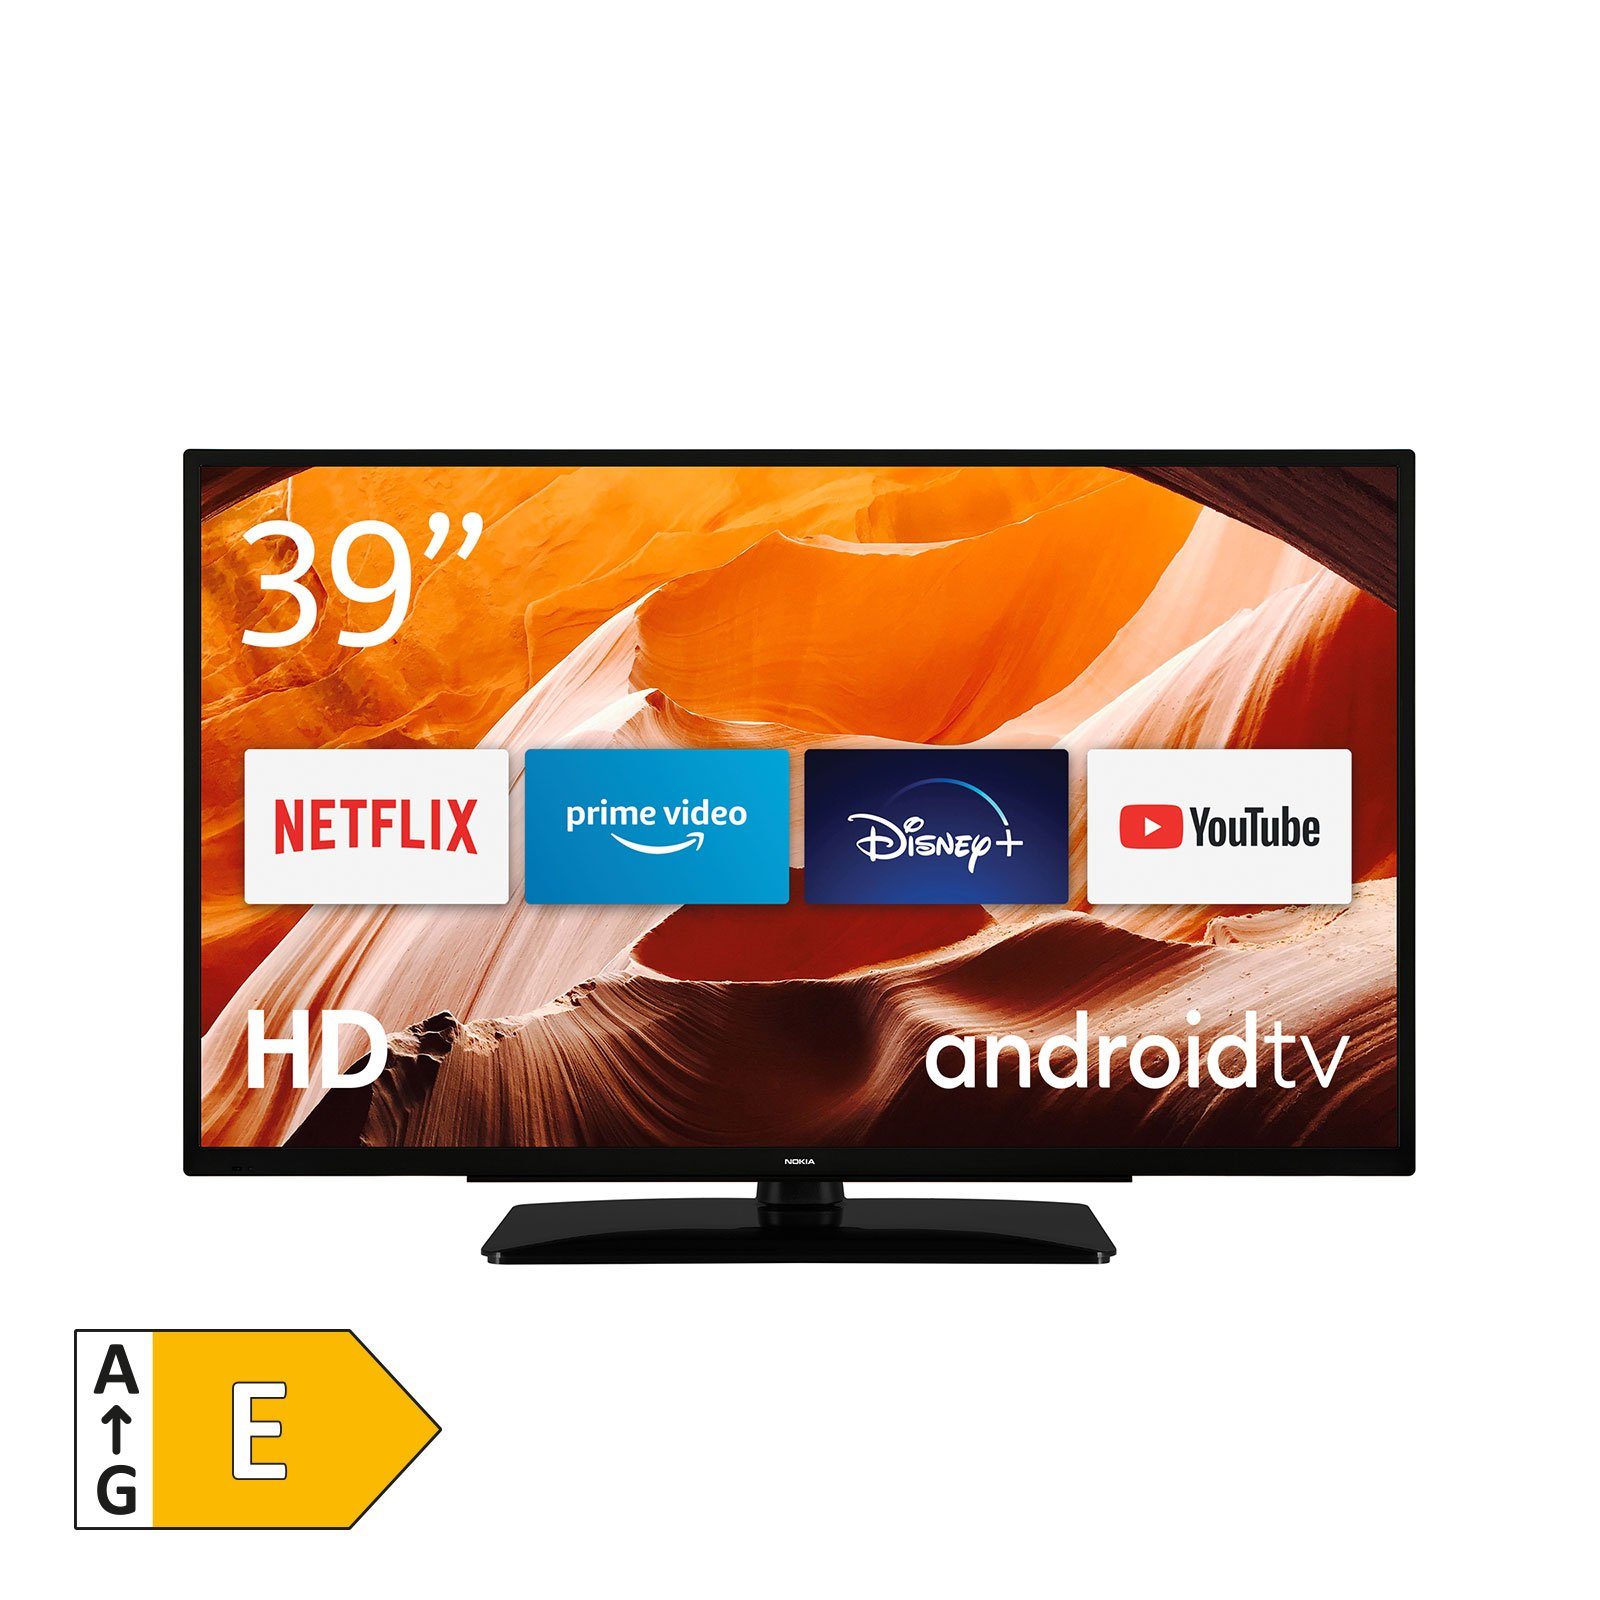 HD, Zoll, LED-Fernseher Nokia cm/39 HNE39GV210 TV) (98 Android